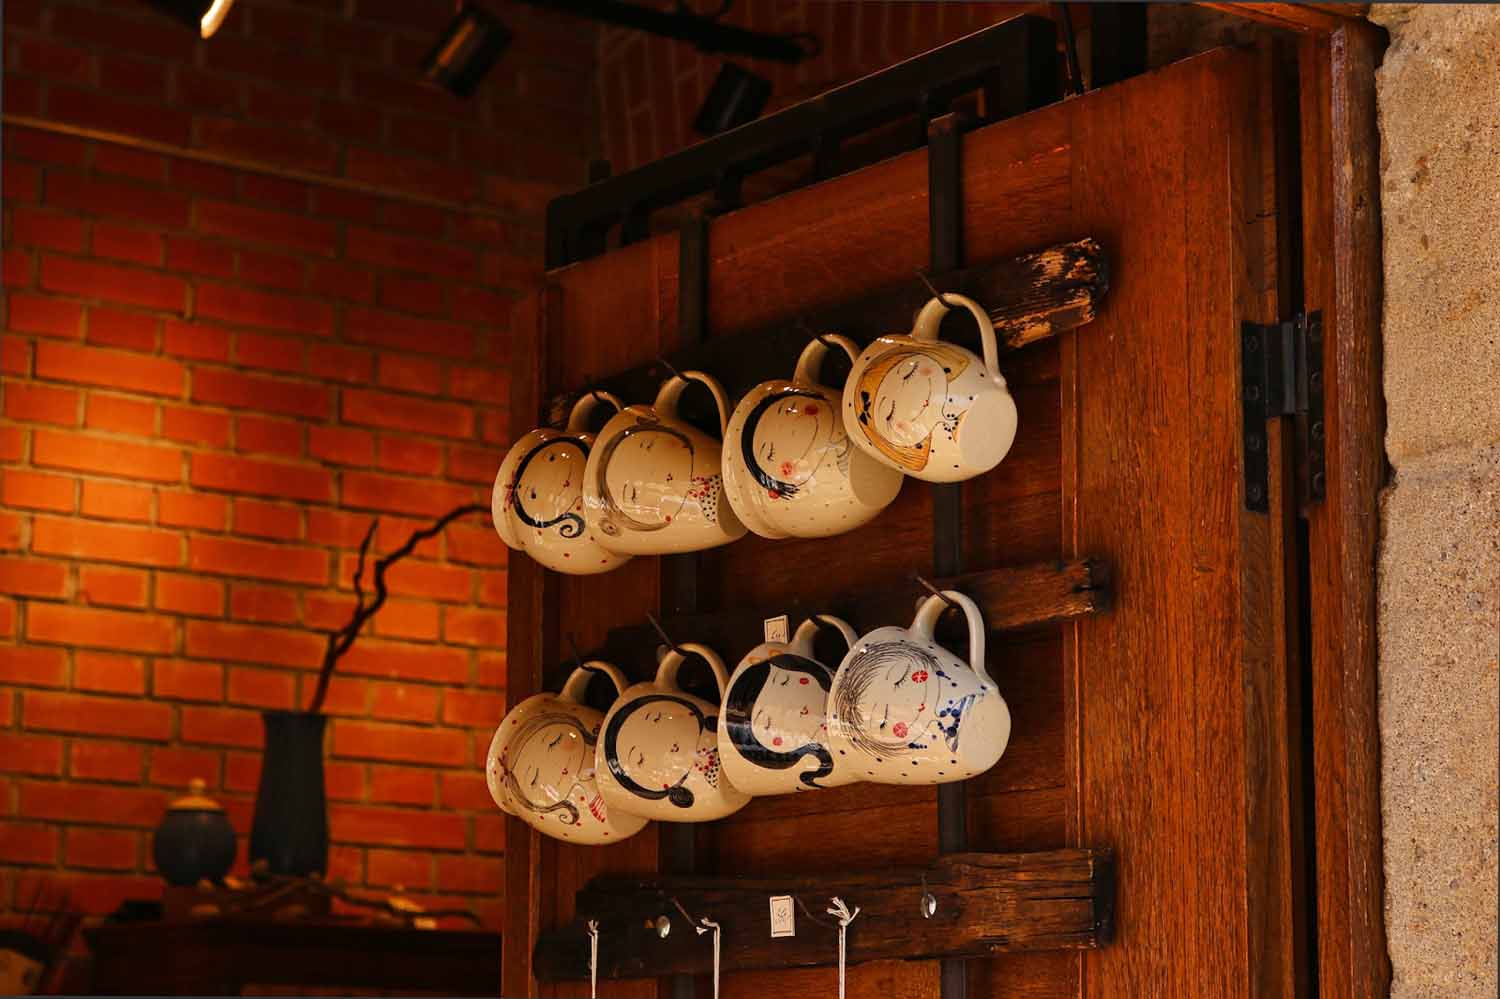 Functional and artstic storage shown by hanging beautiful mugs on a rack attached to a door